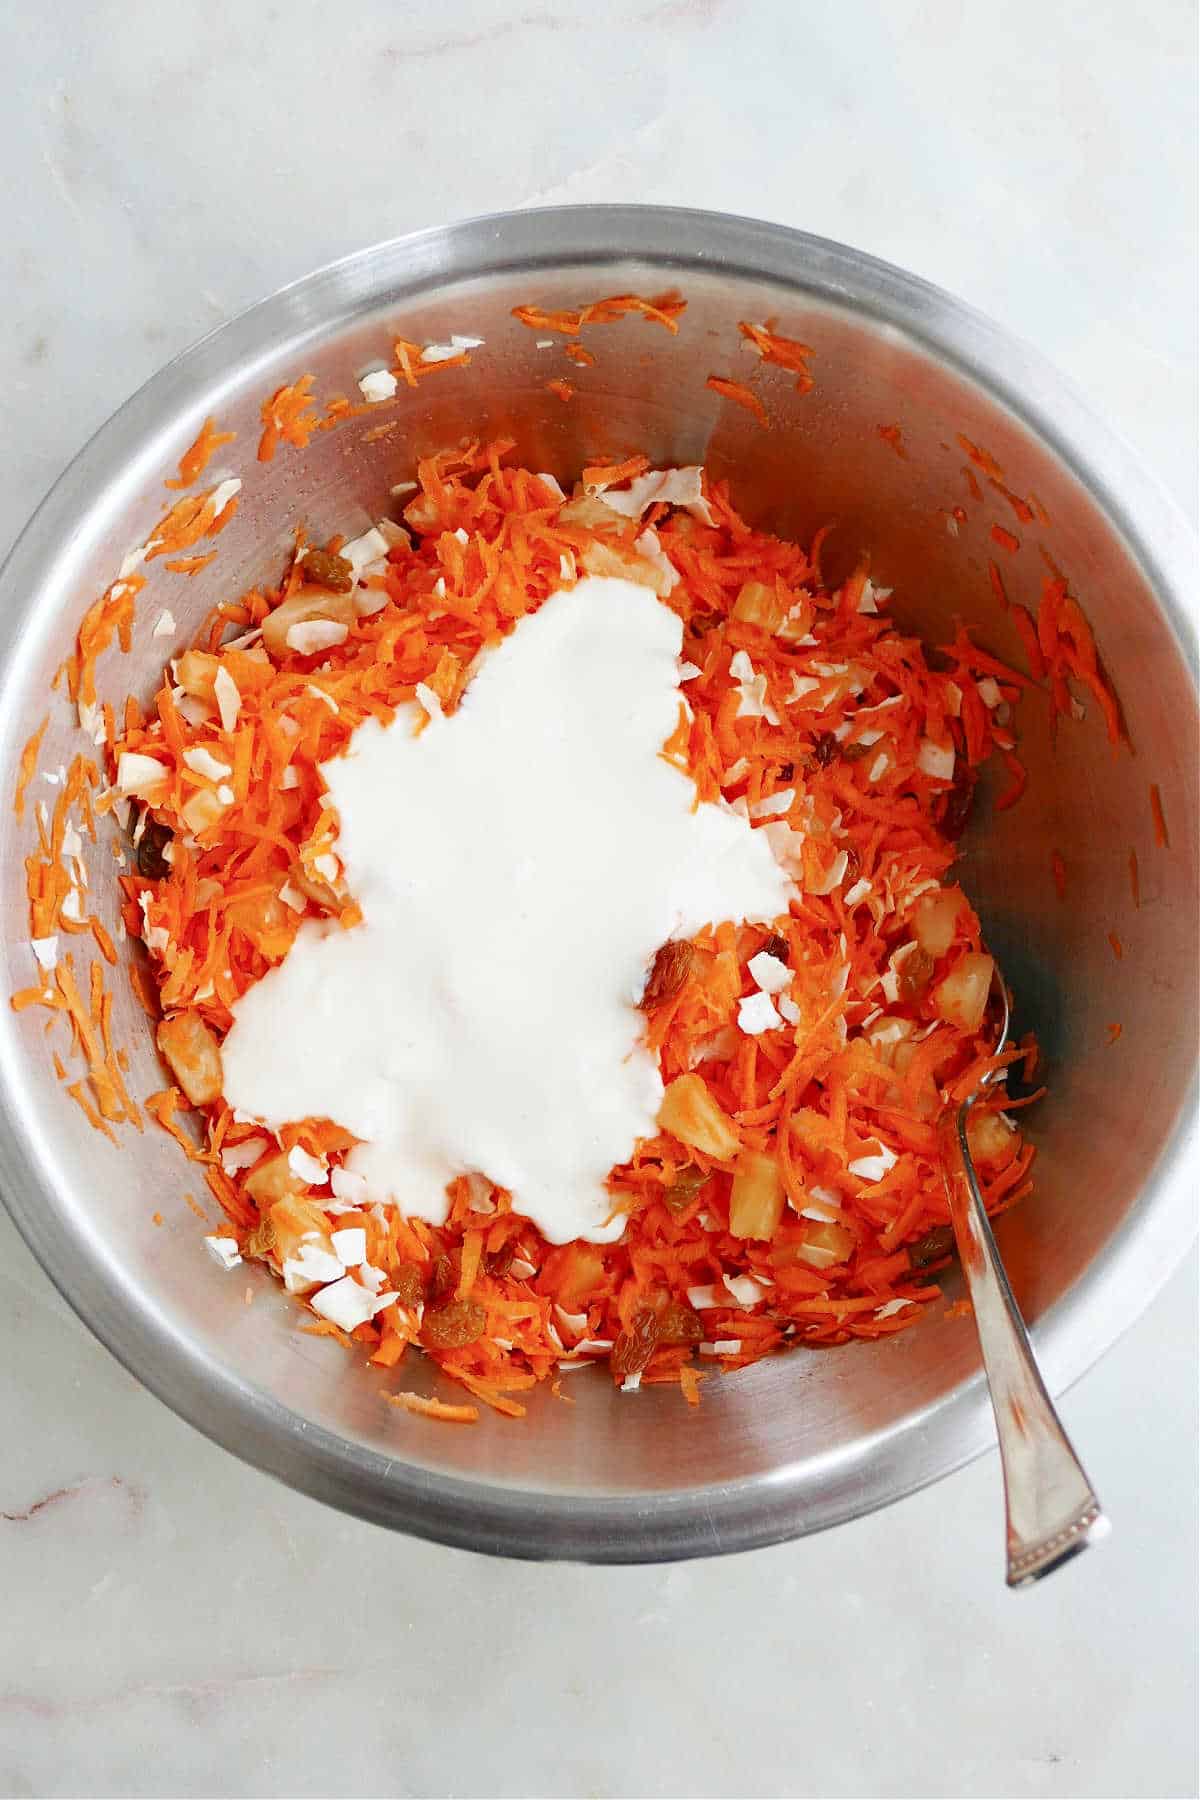 carrot raisin salad ingredients mixed together with yogurt dressing poured on top in a bowl